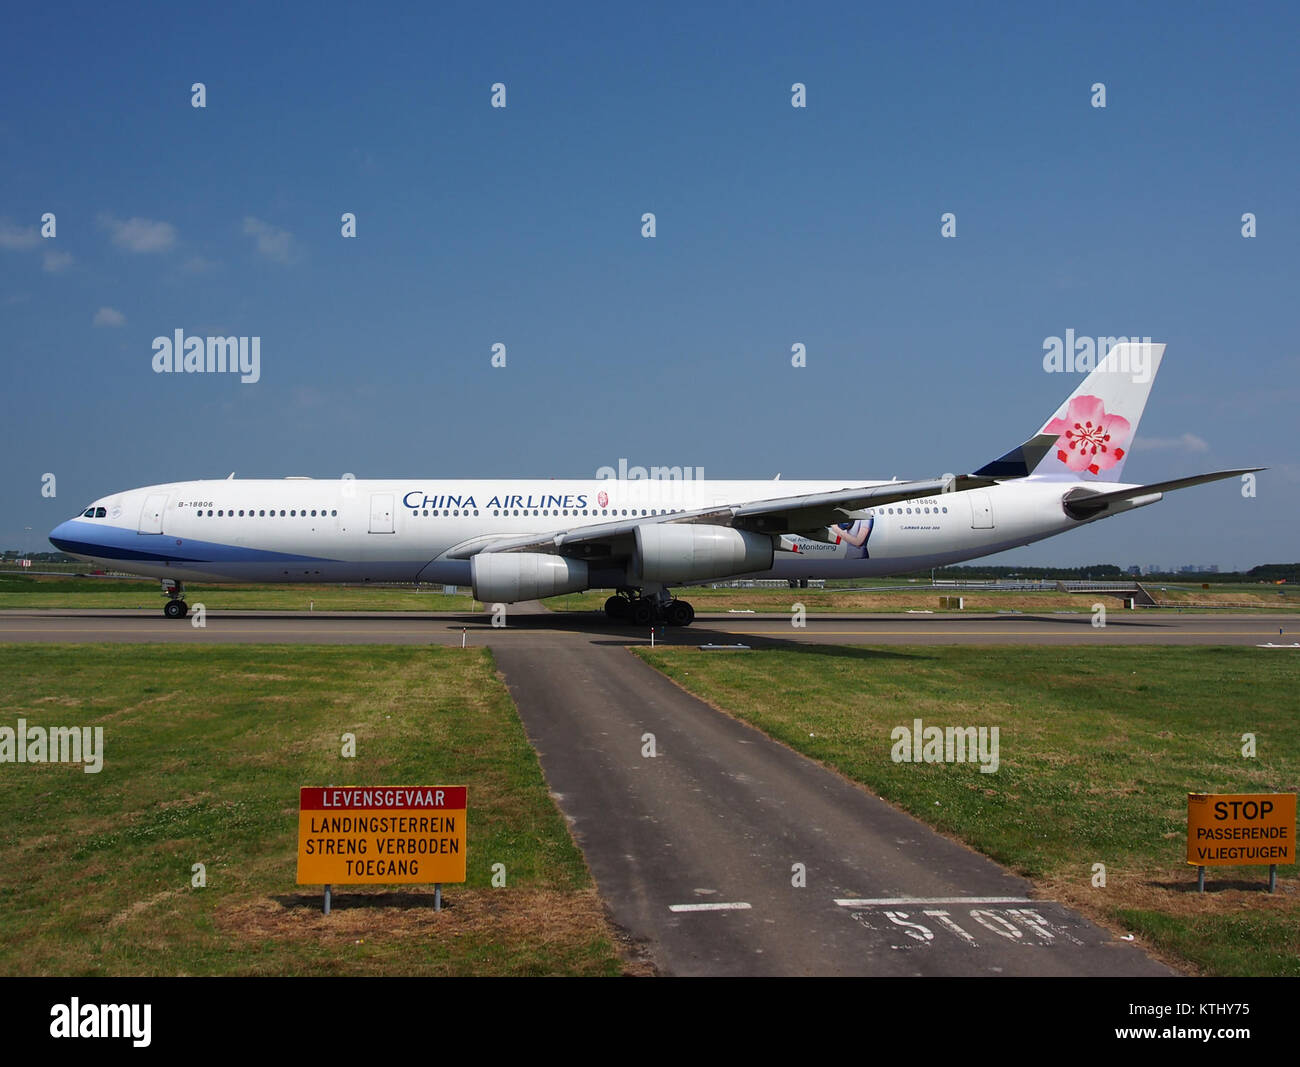 B 18806 China Airlines Airbus A340 313X   cn 433 pic4 Stock Photo